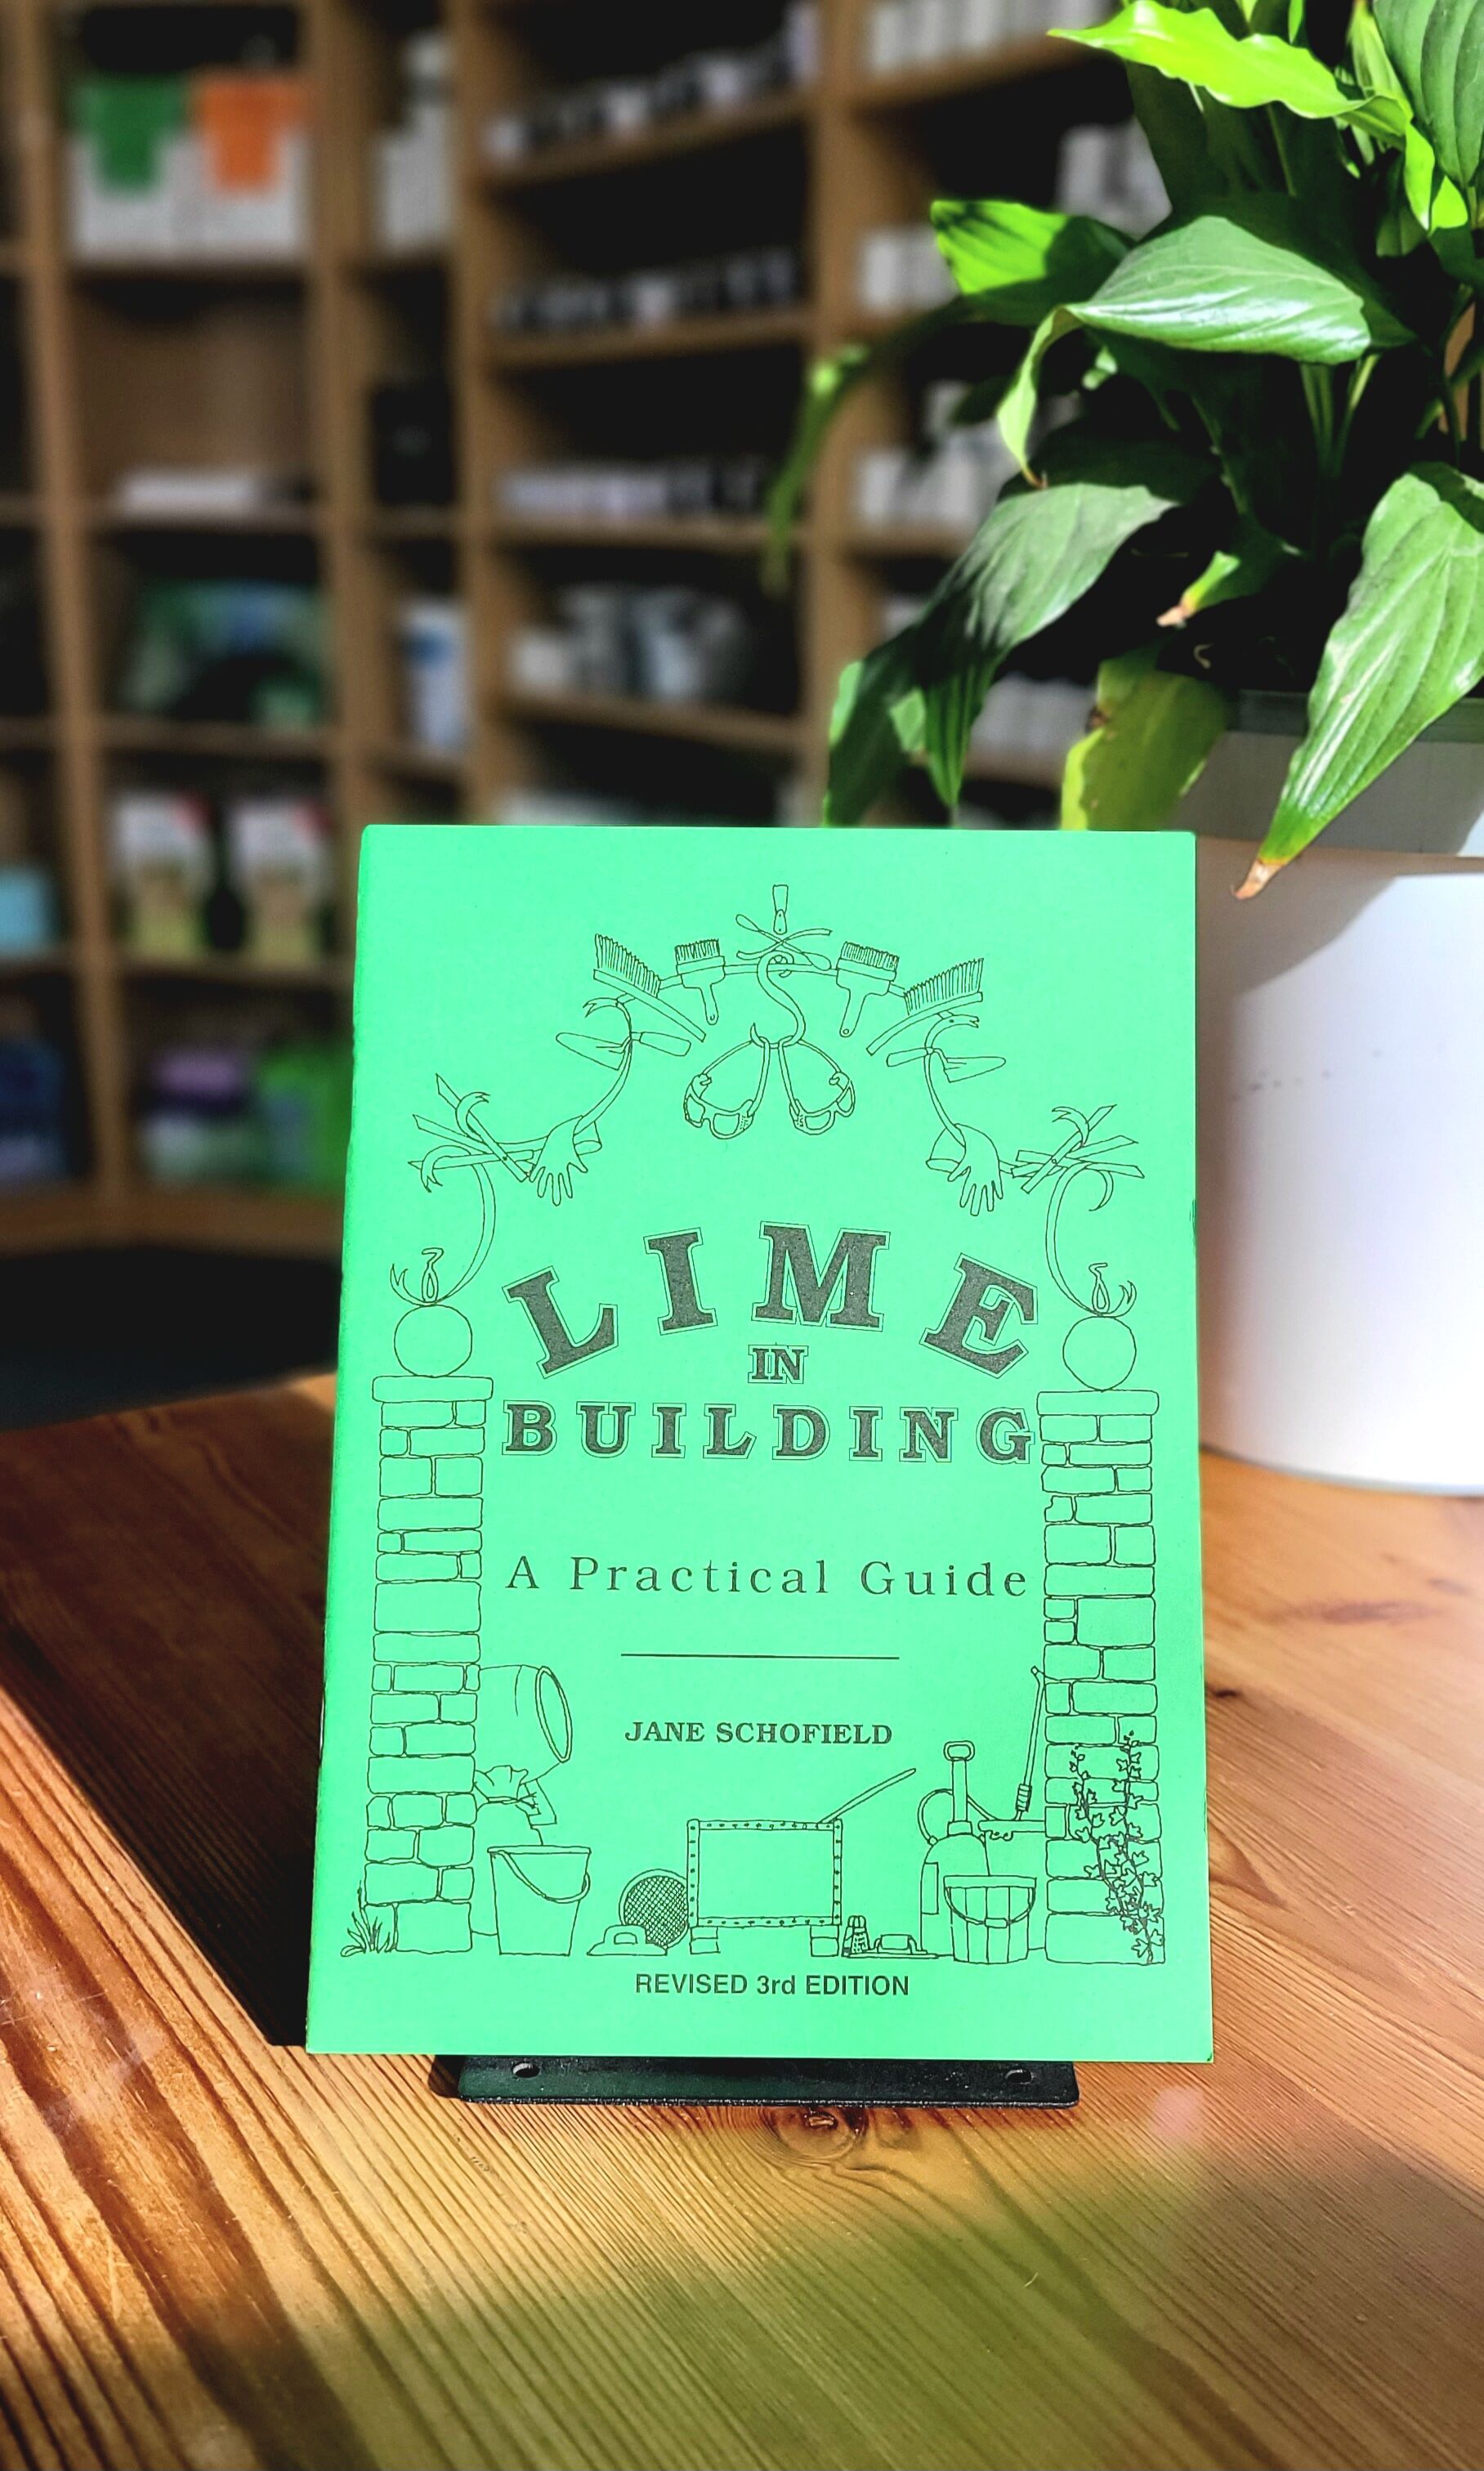 Lime in Building - A Practical Guide by Jane Schofield